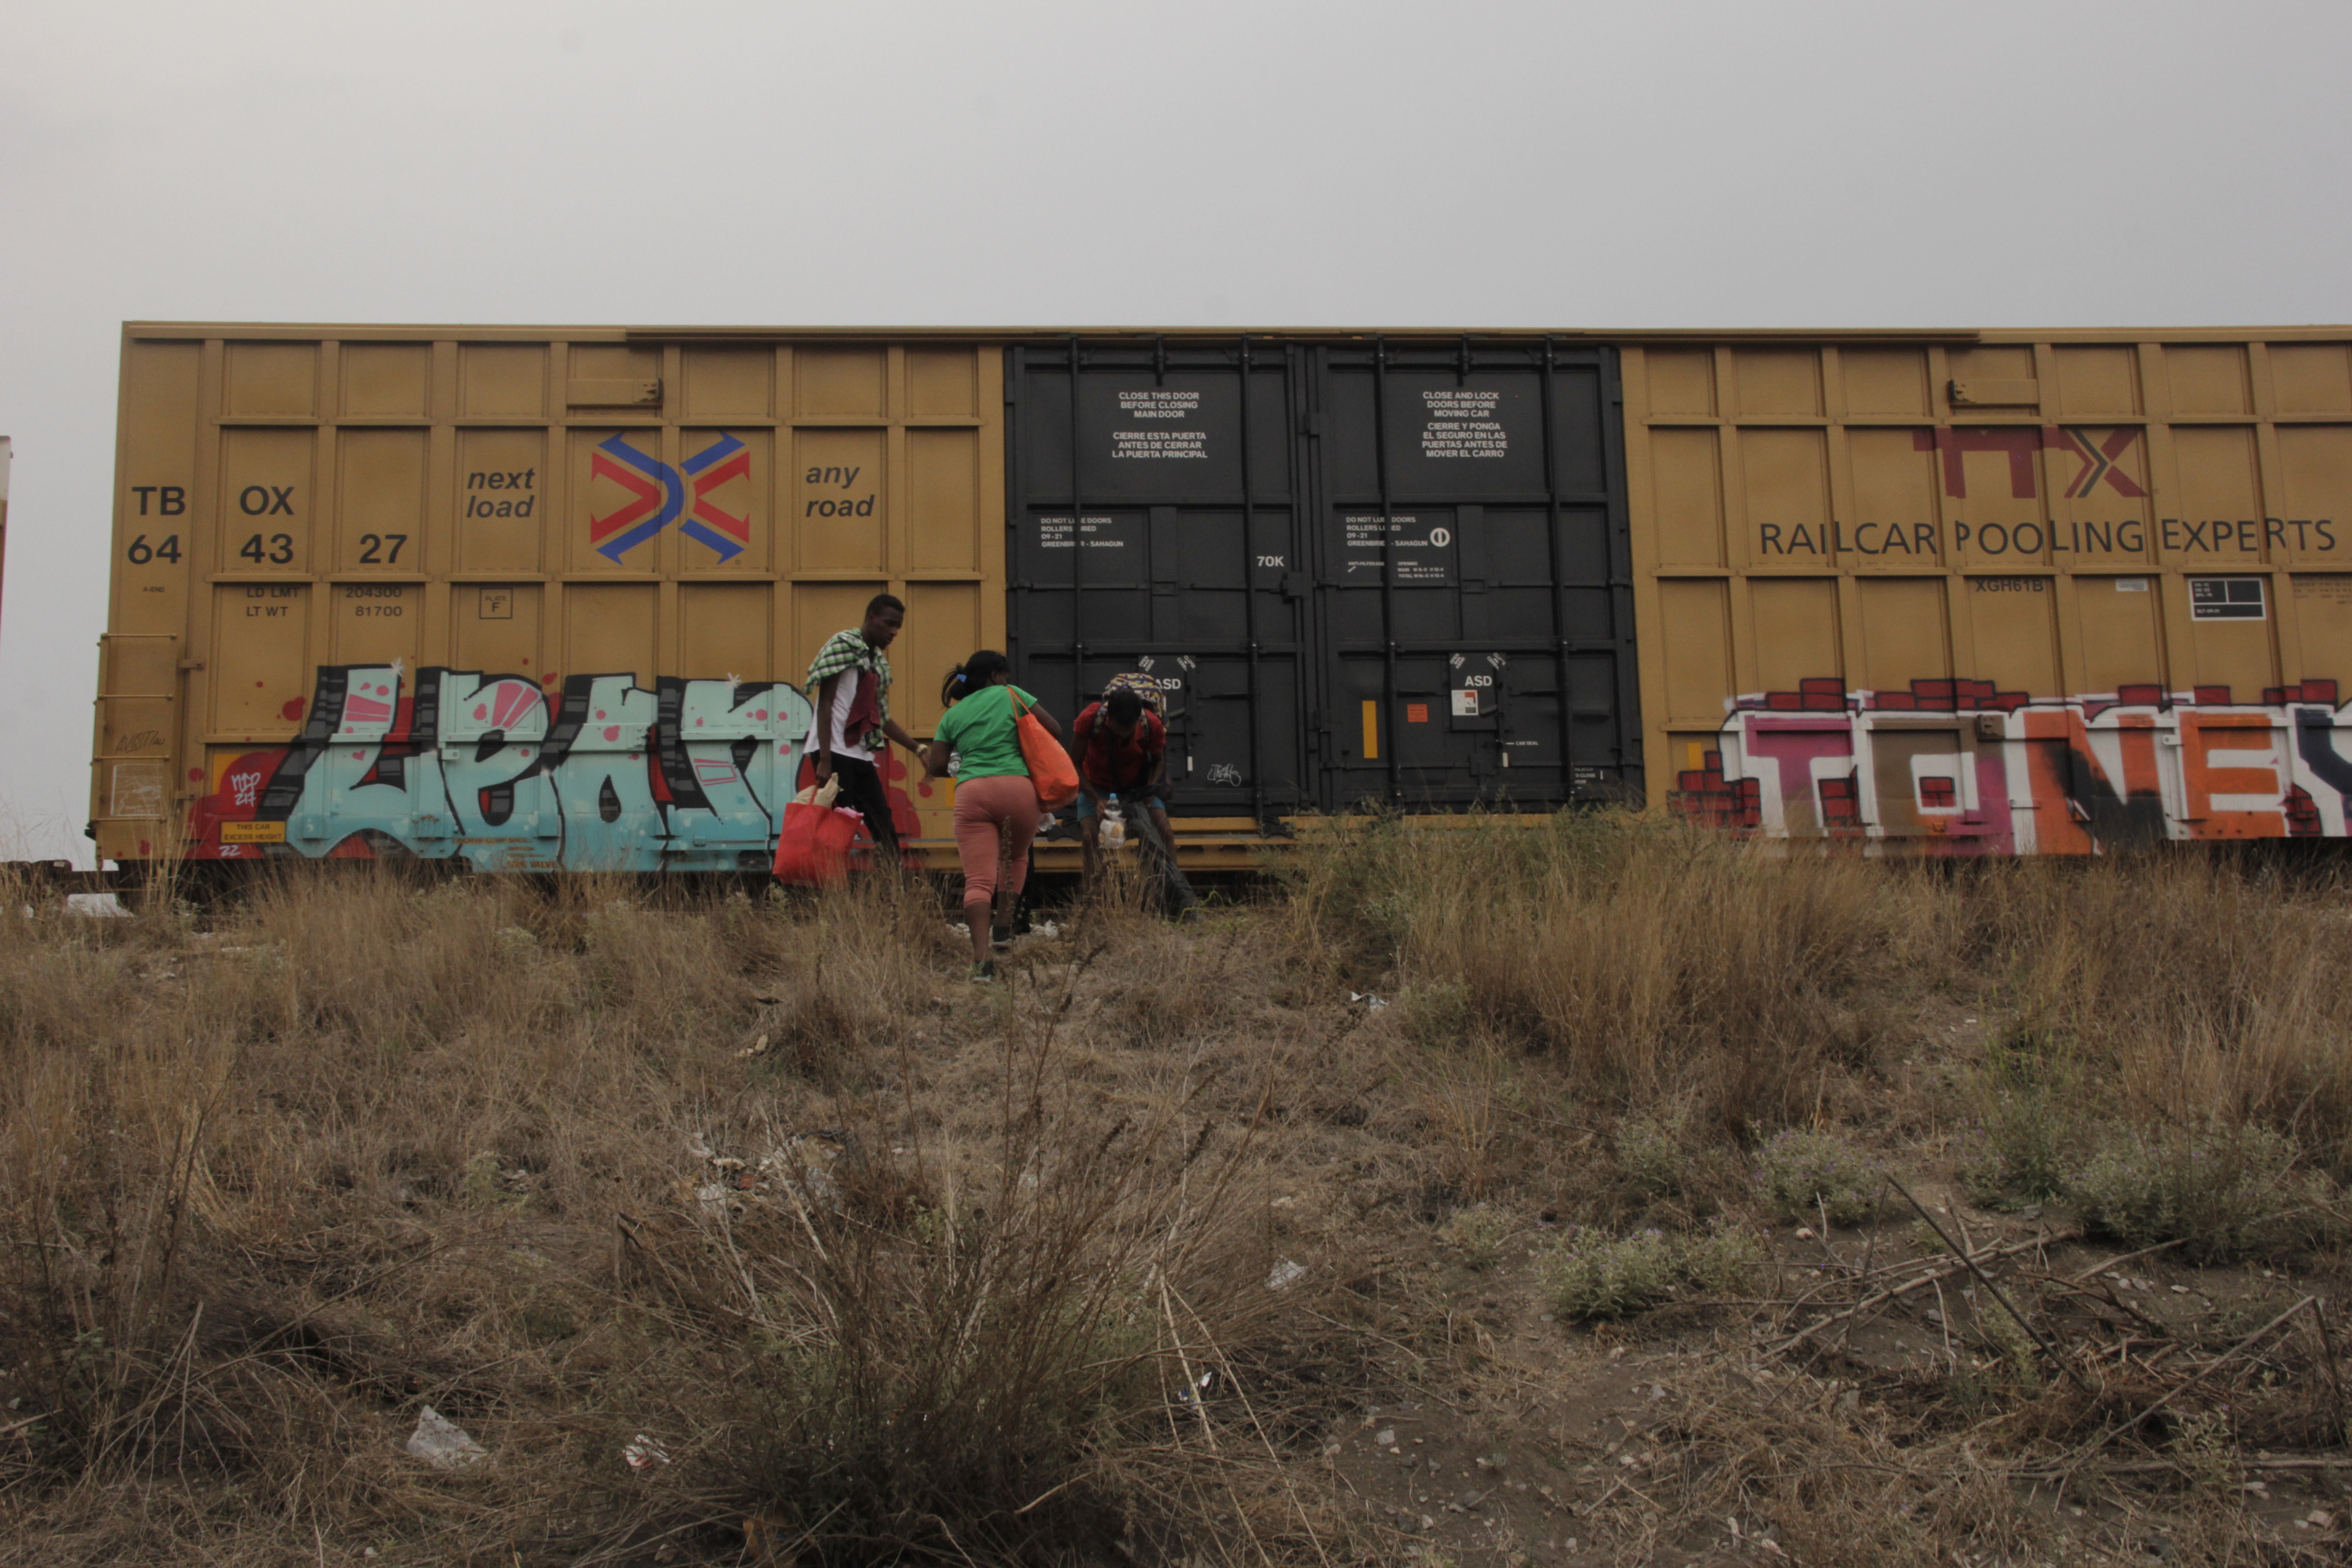 Displaced persons travel along the train tracks in the state of Hidalgo, Mexico, seeking to reach the northern border of México and the U.S. (Ángel Adrián Huerta García)